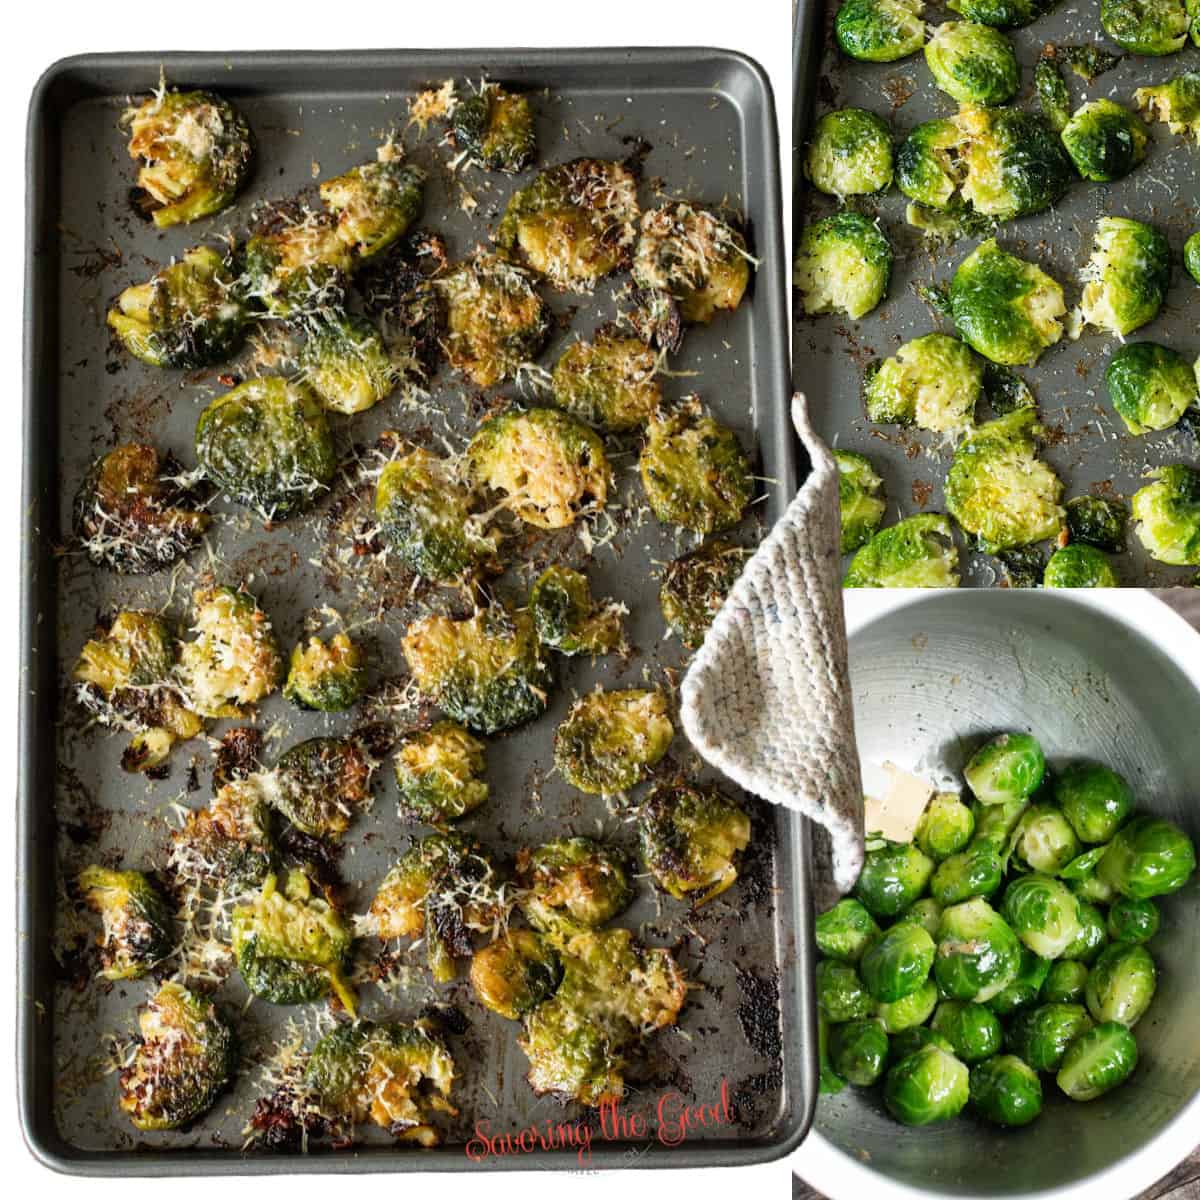 Roasted smashed brussels sprouts on a baking sheet.